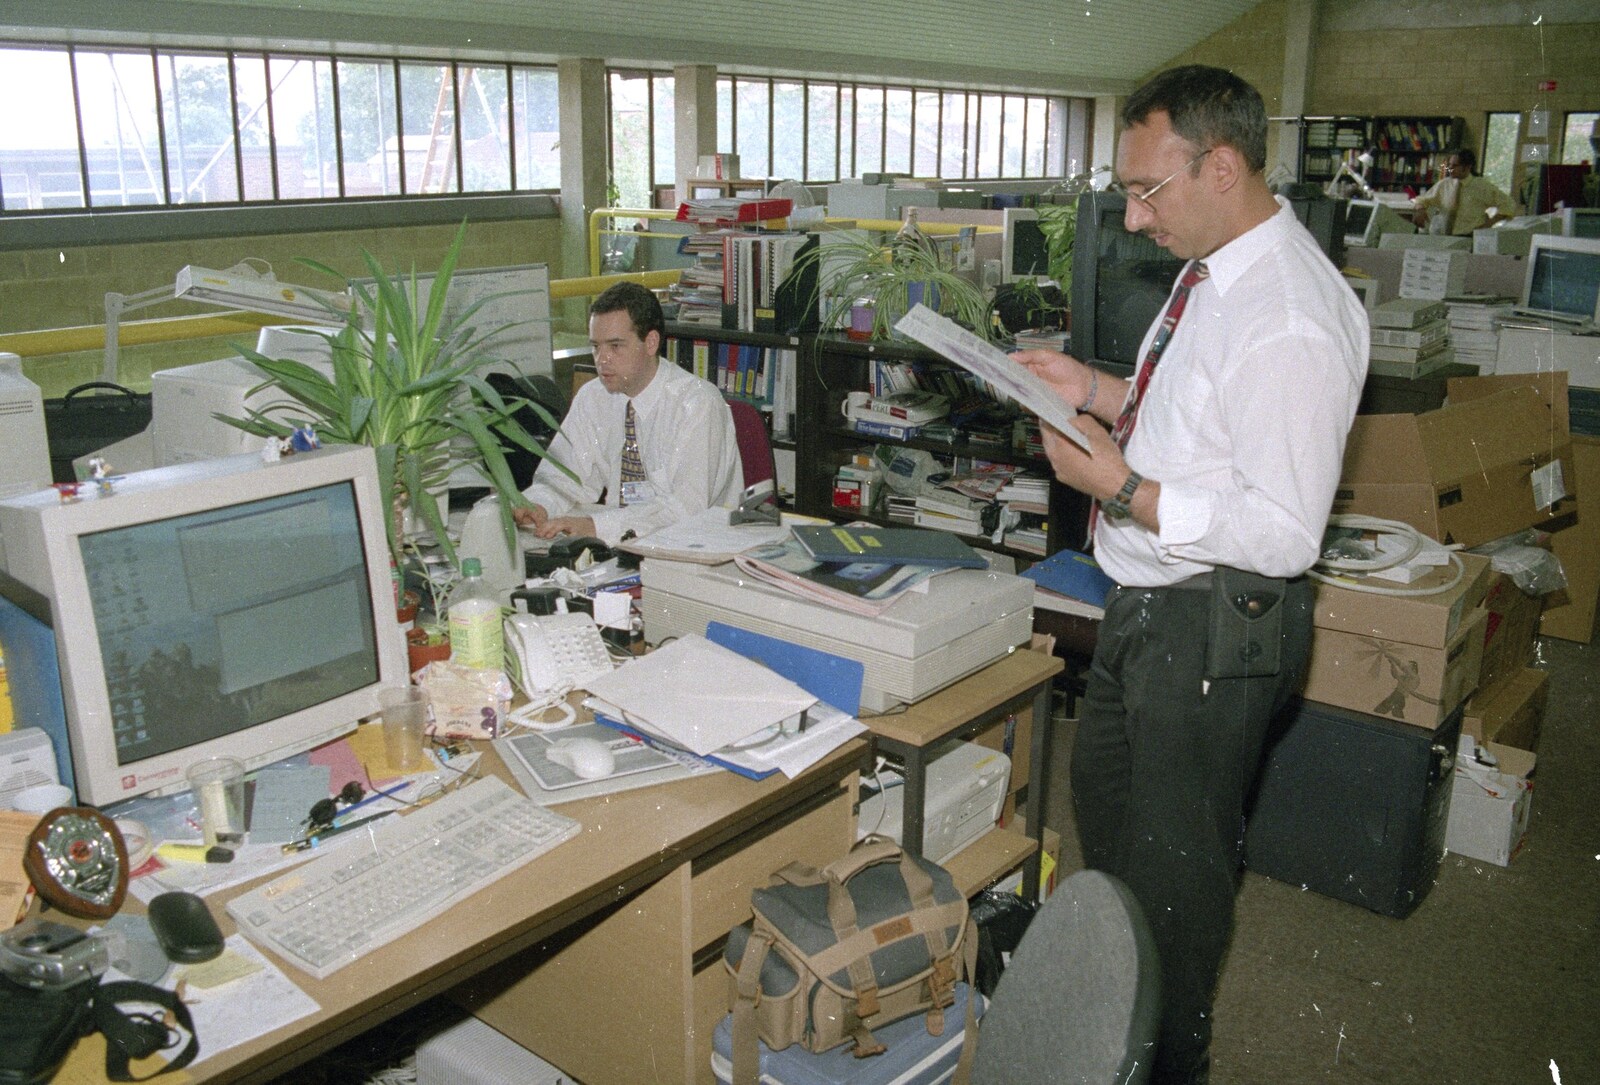 Nosher's Last Day at CISU/SCC, Suffolk County Council, Ipswich - 22nd June 2000: Raj looks at the card whilst lurking by Nosher's desk